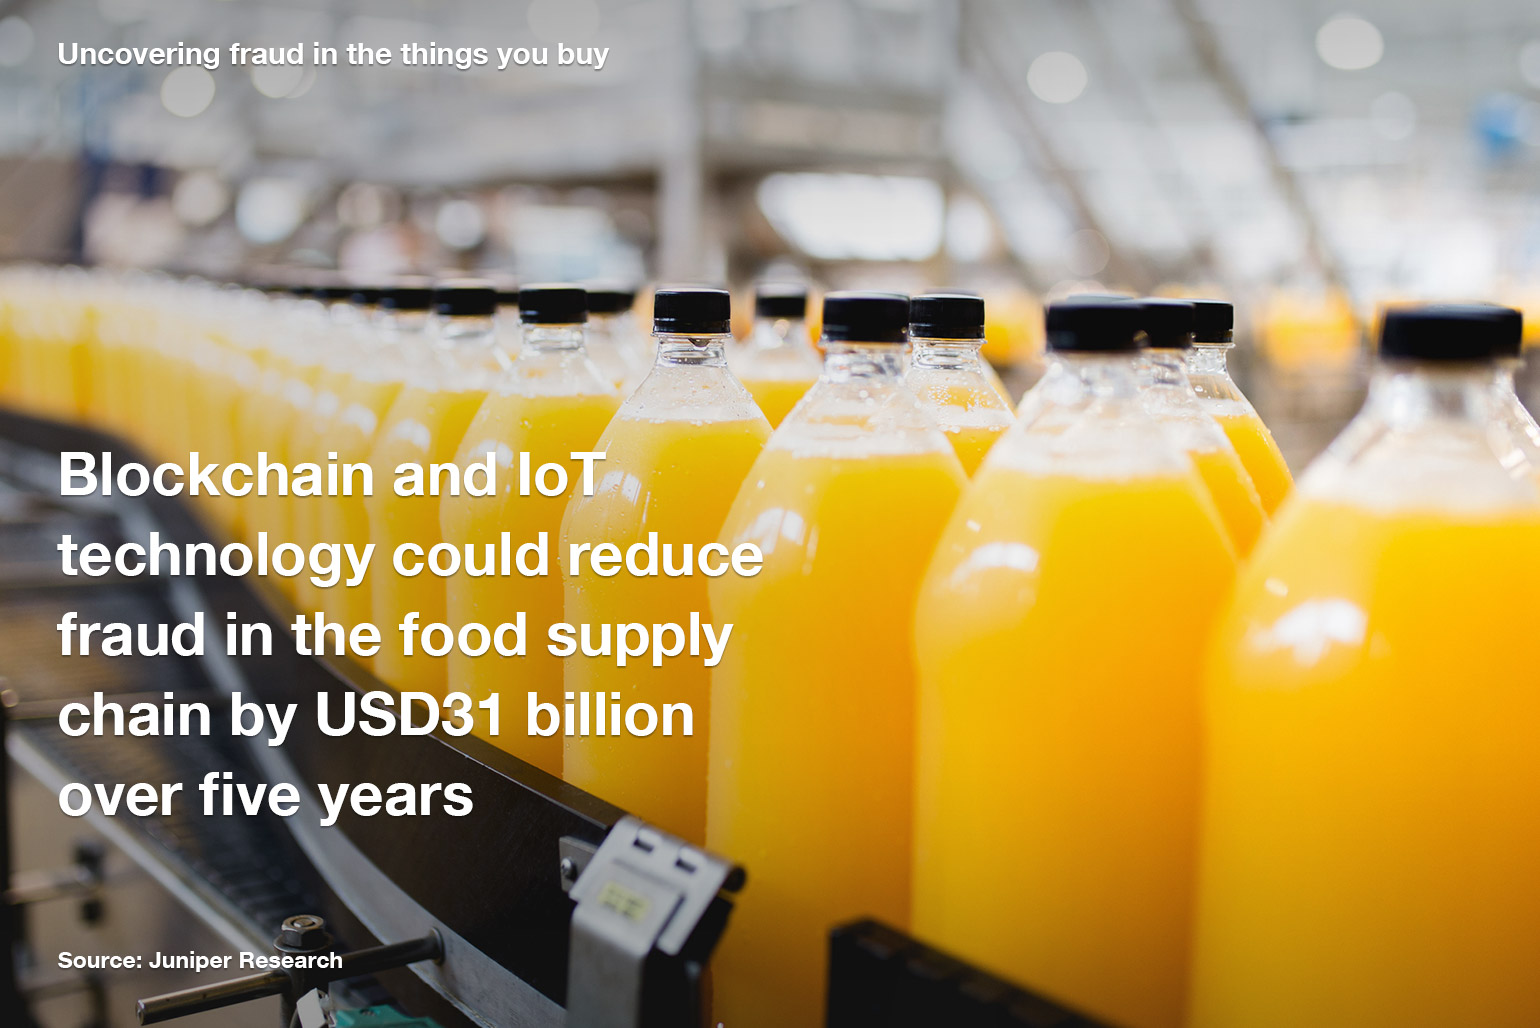 Infographic showing Blockchain and IOT could reduce fraud in food supply chain